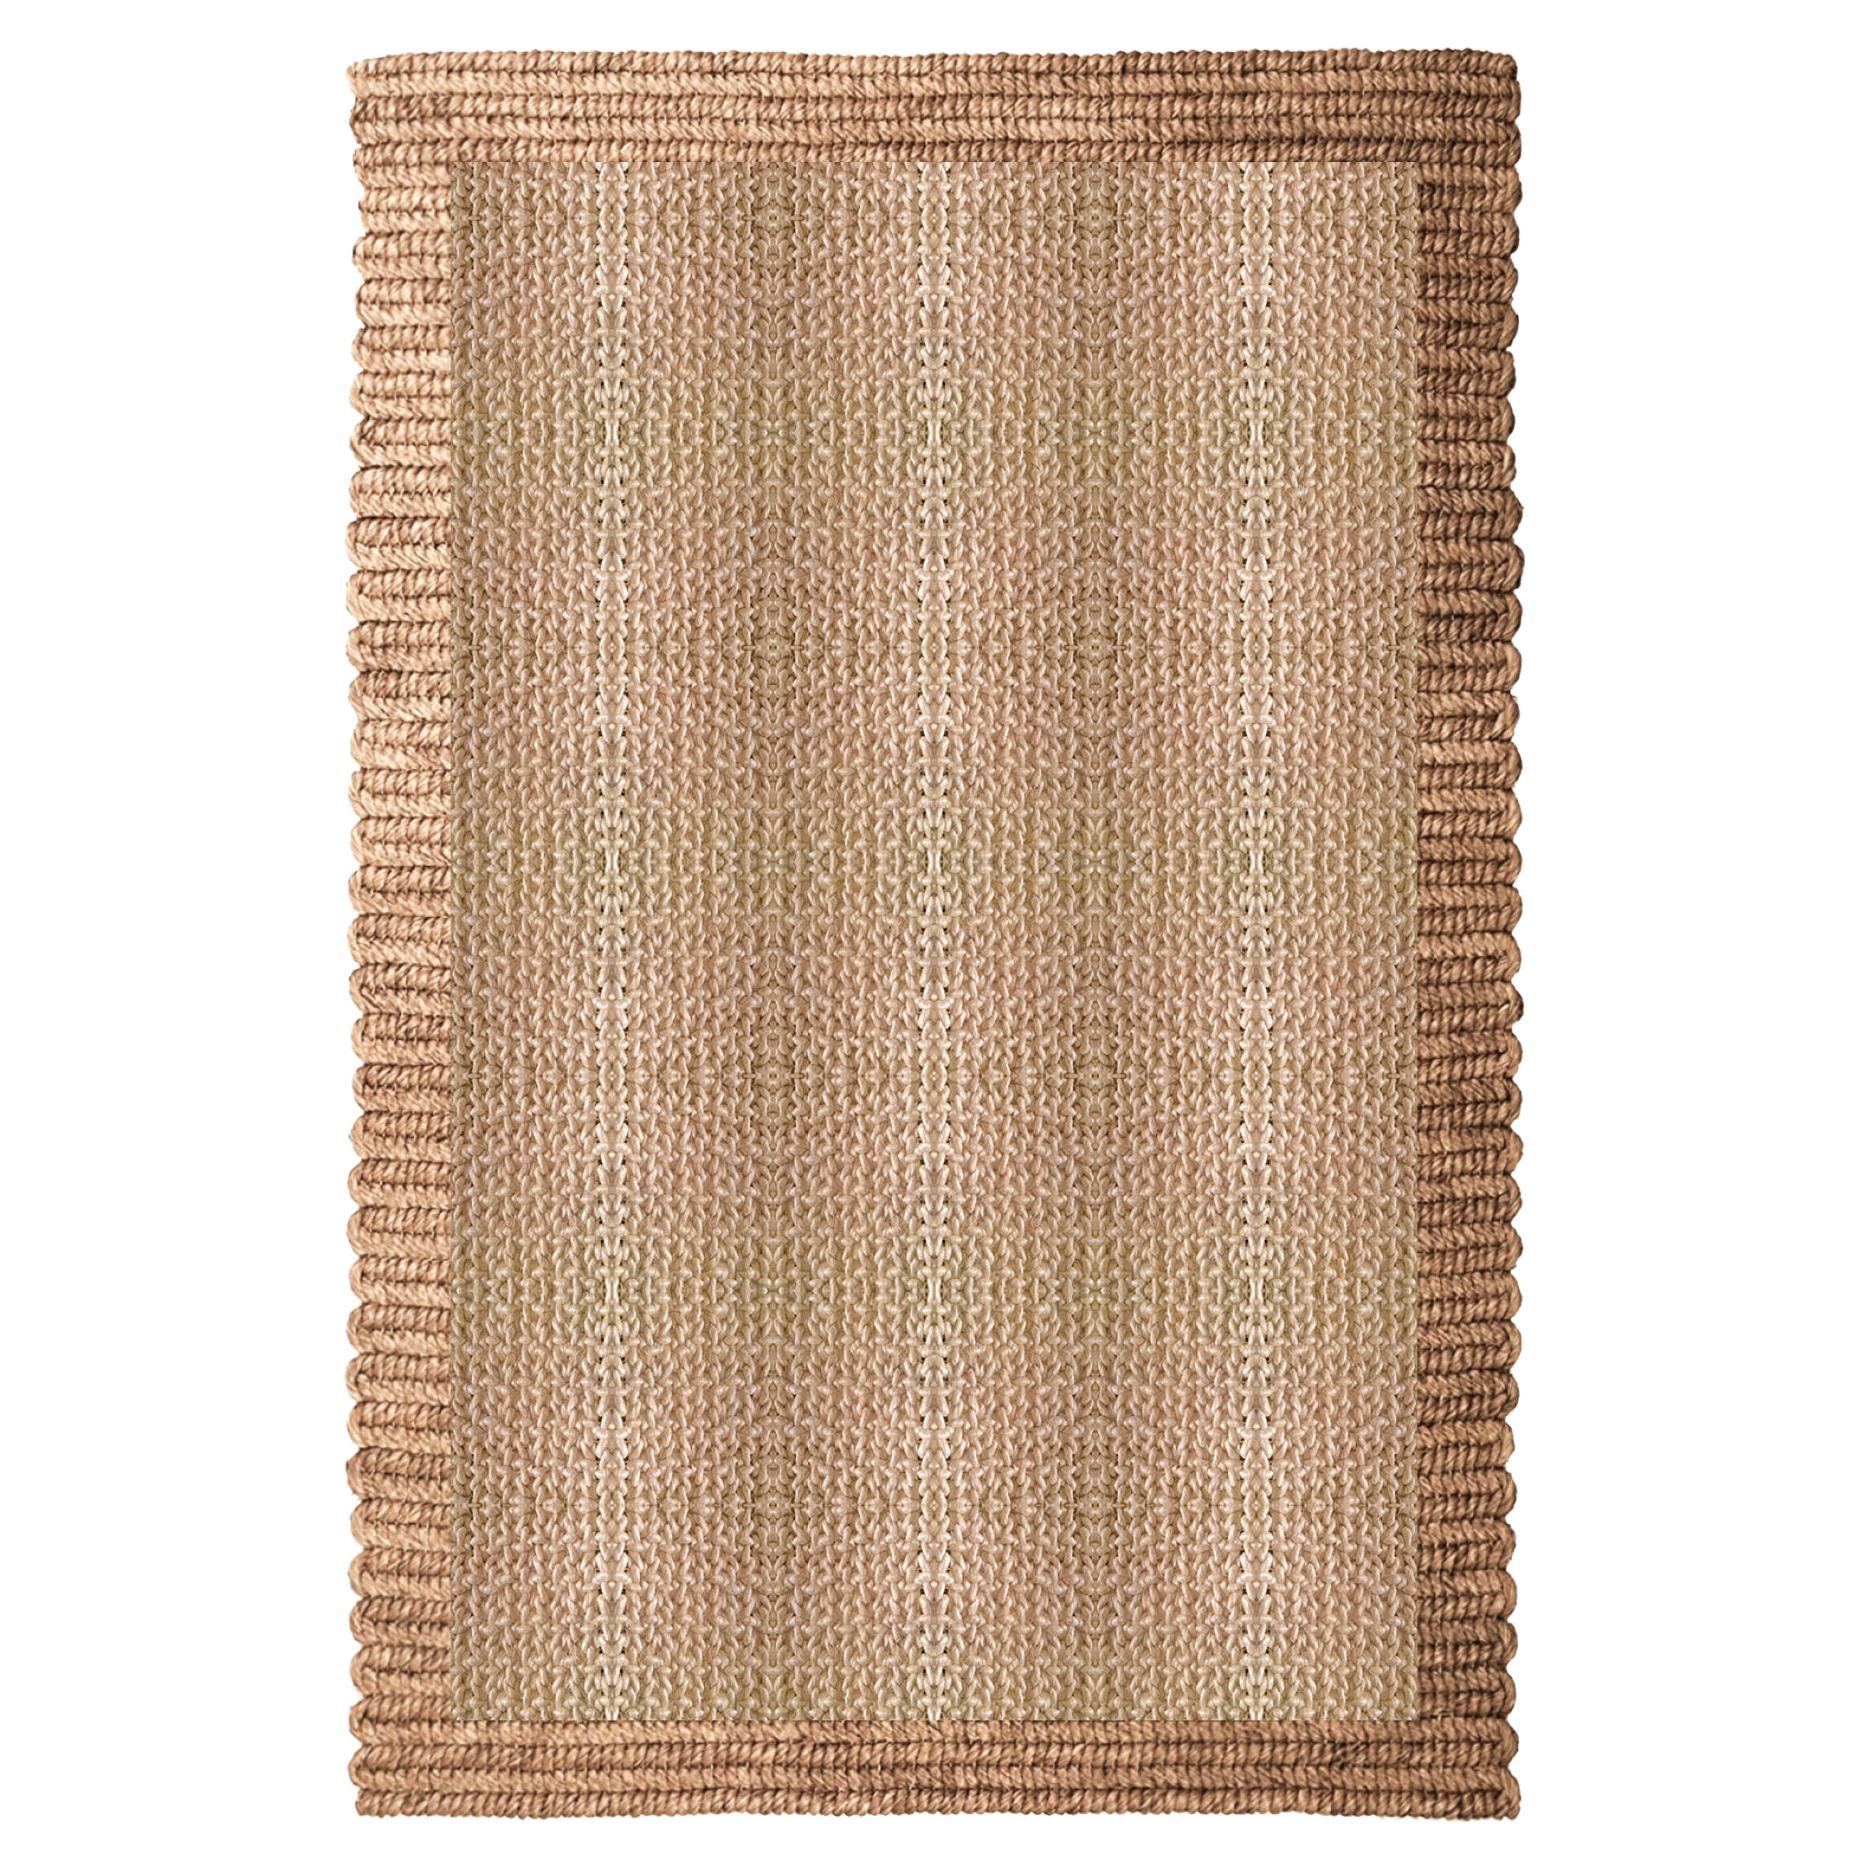 'Nap Uni' Rug in Abaca, by Claire Vos for Musett Design For Sale